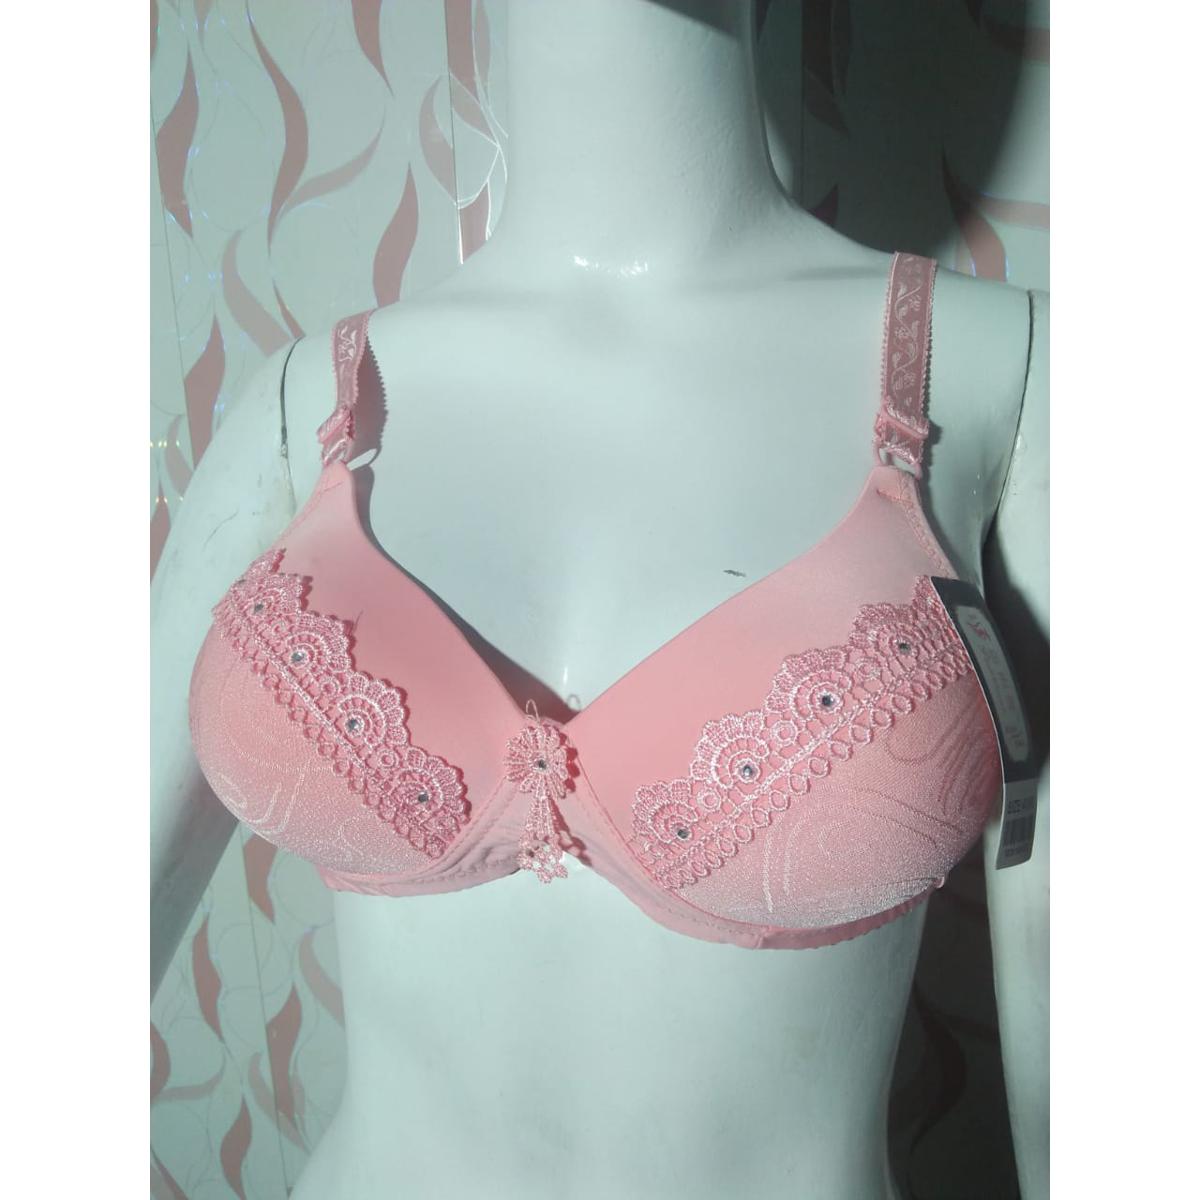 pack of 1-ladies women foam bra, (size 32 to 42), high quality product,  excellent hot look foam brazier, high quality foam bra